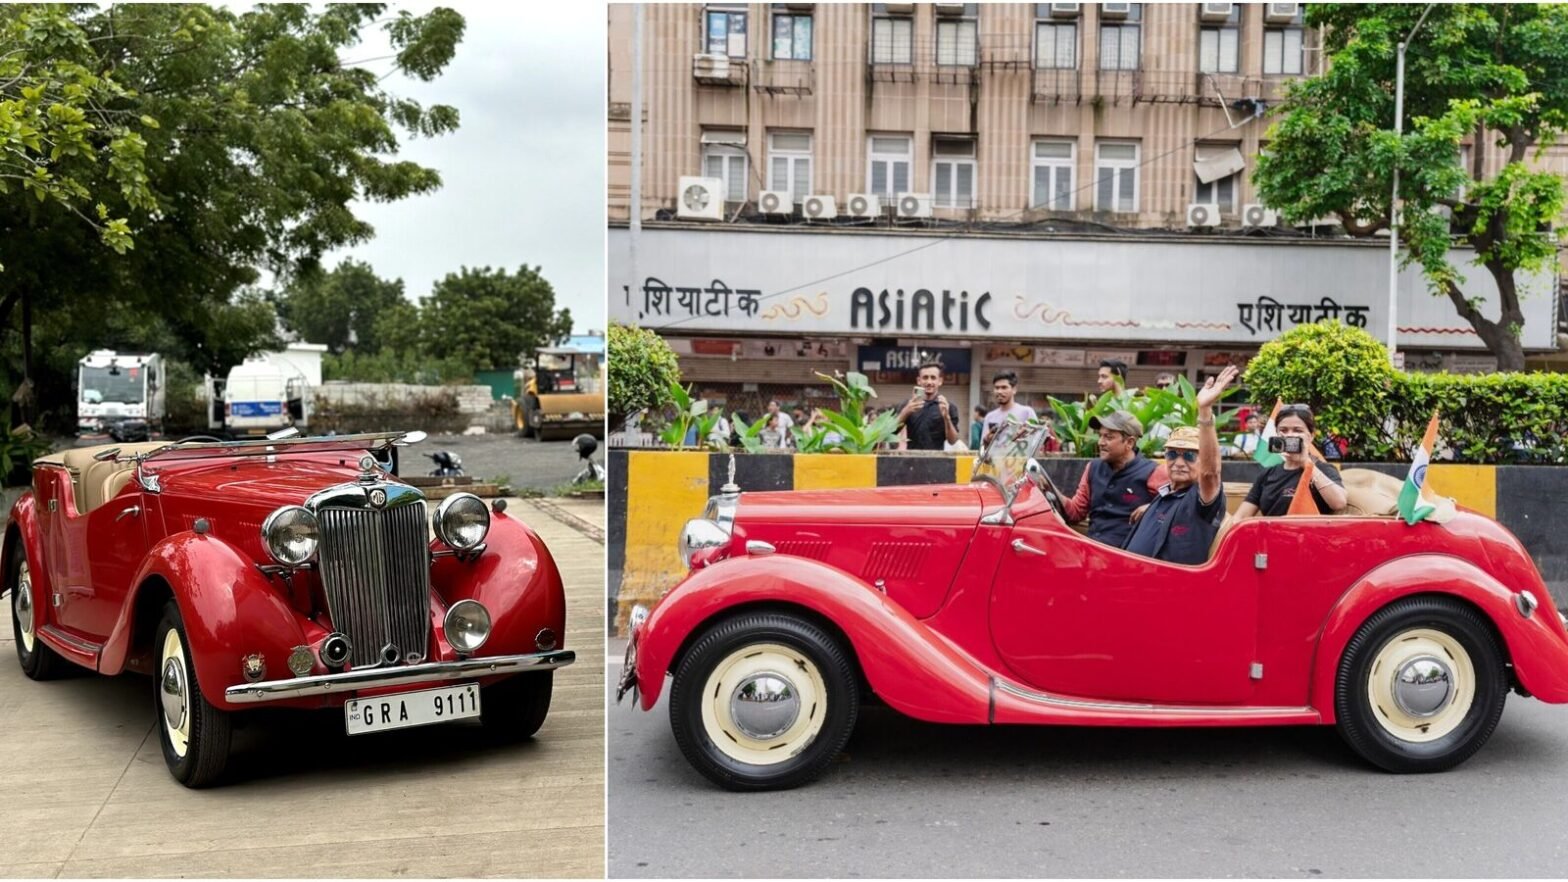 Indian family embarks on road trip to London in 73-year-old MG vintage car